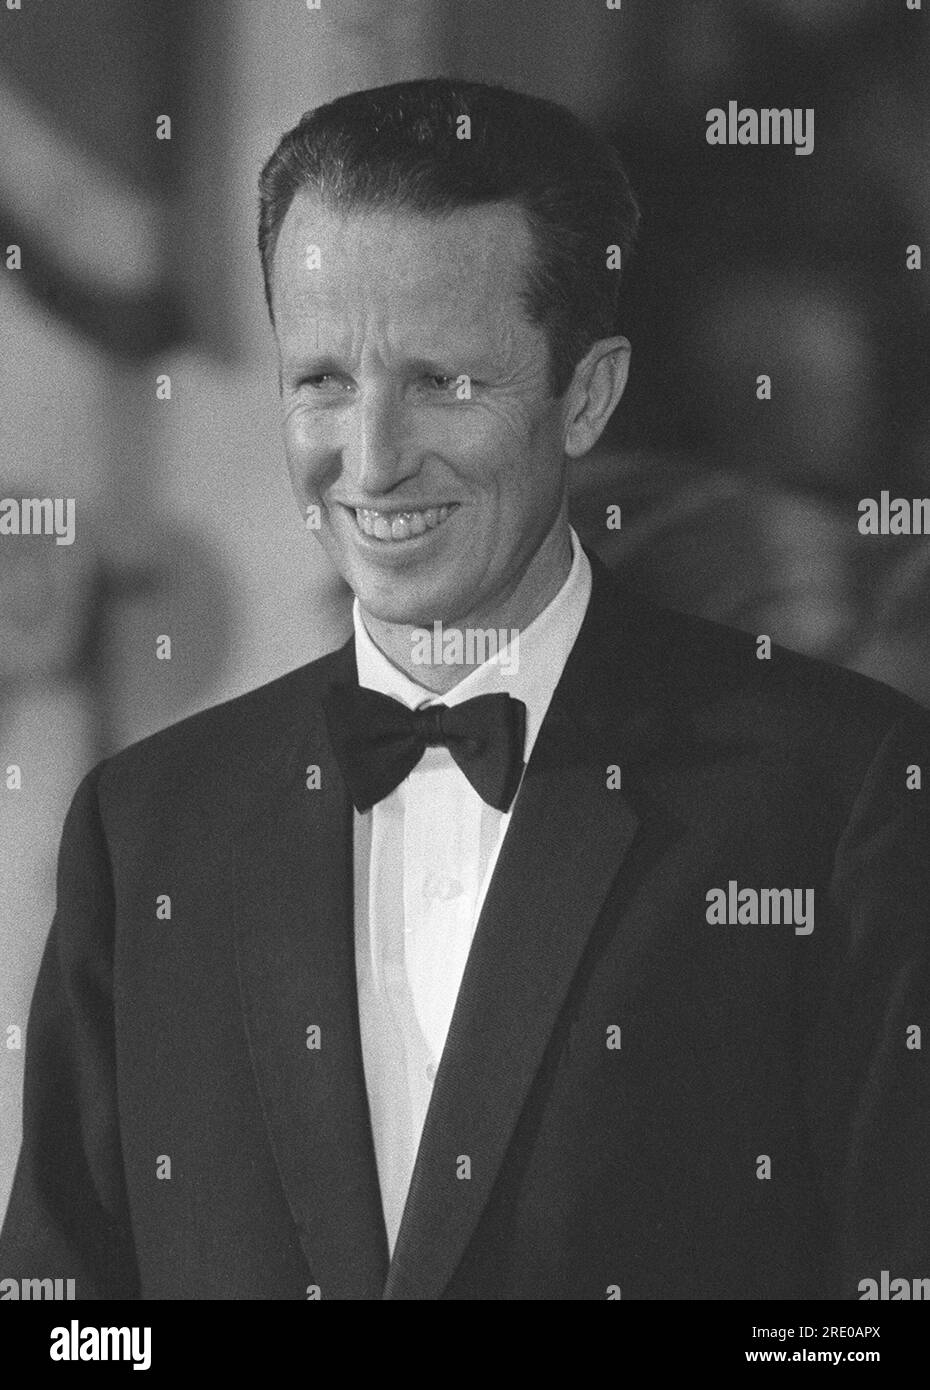 ARCHIVE PHOTO: 30 years ago, on July 31, 1993, died the Belgian King BAUDOUIN, Koenig BAUDUIN, Belgian King, Baudouin I., French: Baudouin Albert Charles L?opold Axel Marie Gustave or Dutch: Boudewijn Albert Karel Leopold Axel Marie Gustaaf, in German Balduin I.) was King of the Belgi from 1951 to 1993 he and eldest son of Leopold III. from the house of Saxe-Coburg and Gotha, half-length portrait, portrait, slightly to the side, black and white photo, March 29th, 1974. ?Sven Simon#Prinzess-Luise-Strasse 41#45479 Muelheim/R uhr #tel. 0208/9413250#fax. 0208/9413260# Postgiro Essen No. 244 293 Stock Photo